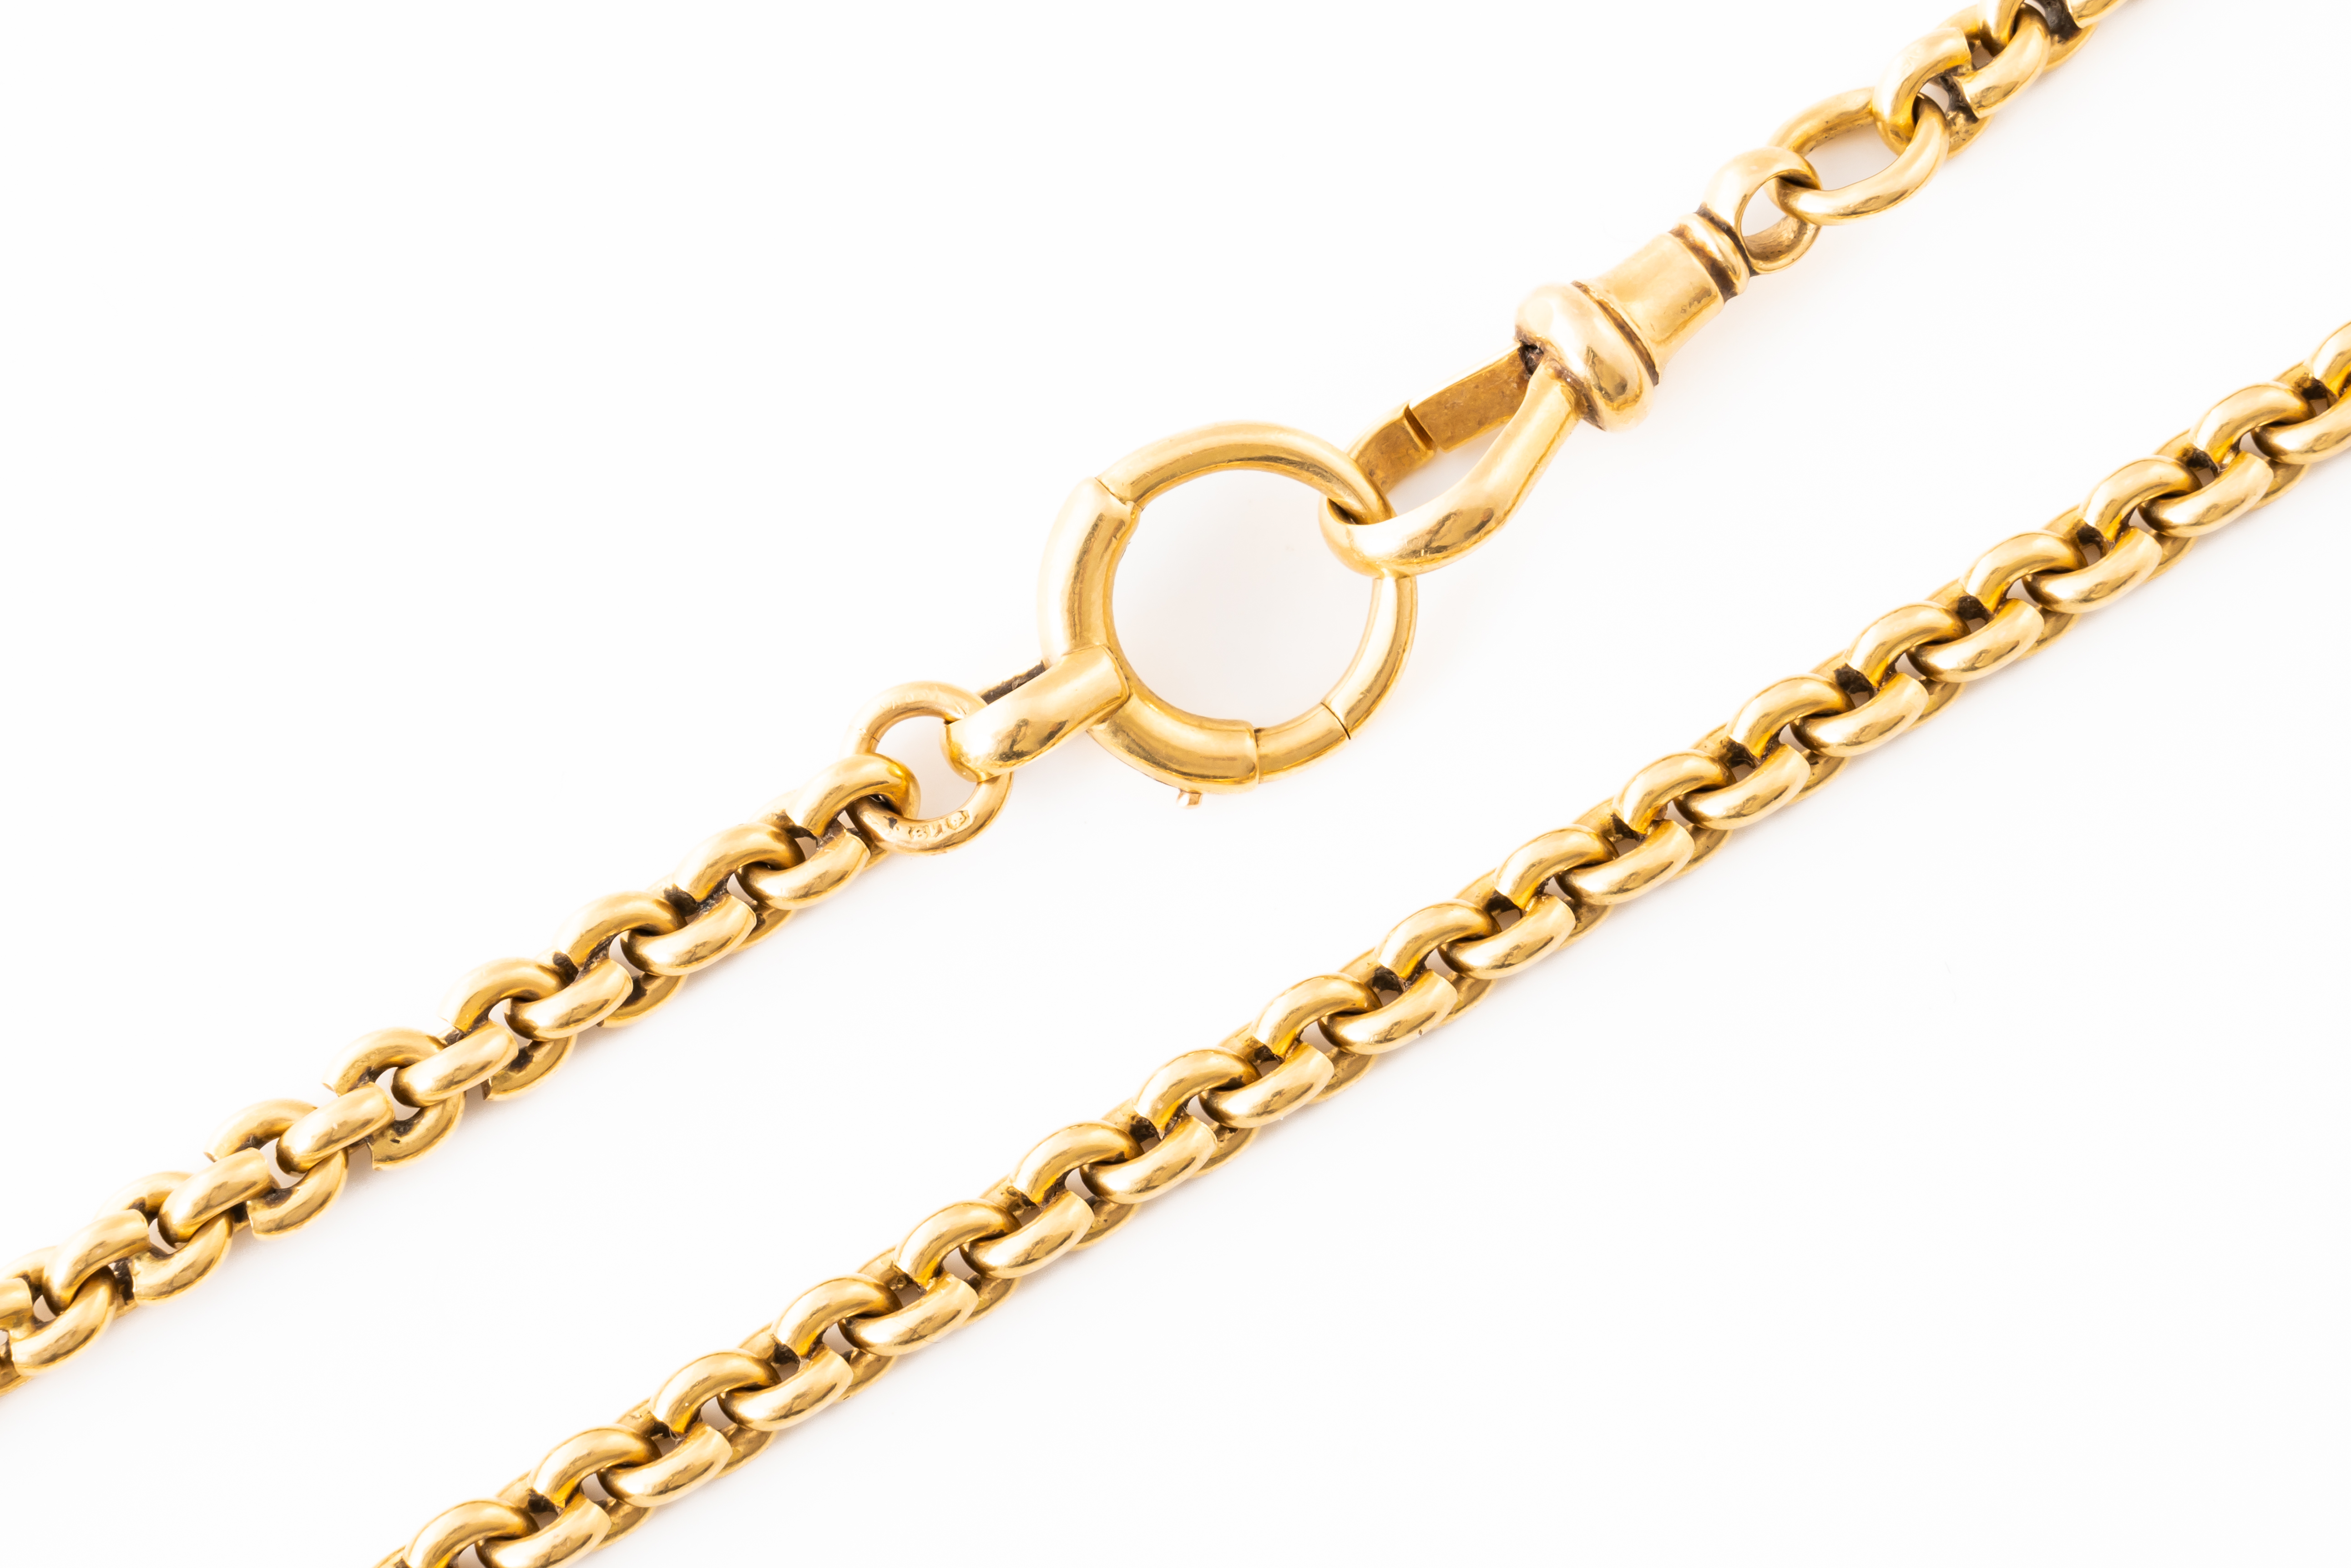 A HEAVY 18CT FANCY LINK GOLD CHAIN - Image 3 of 3